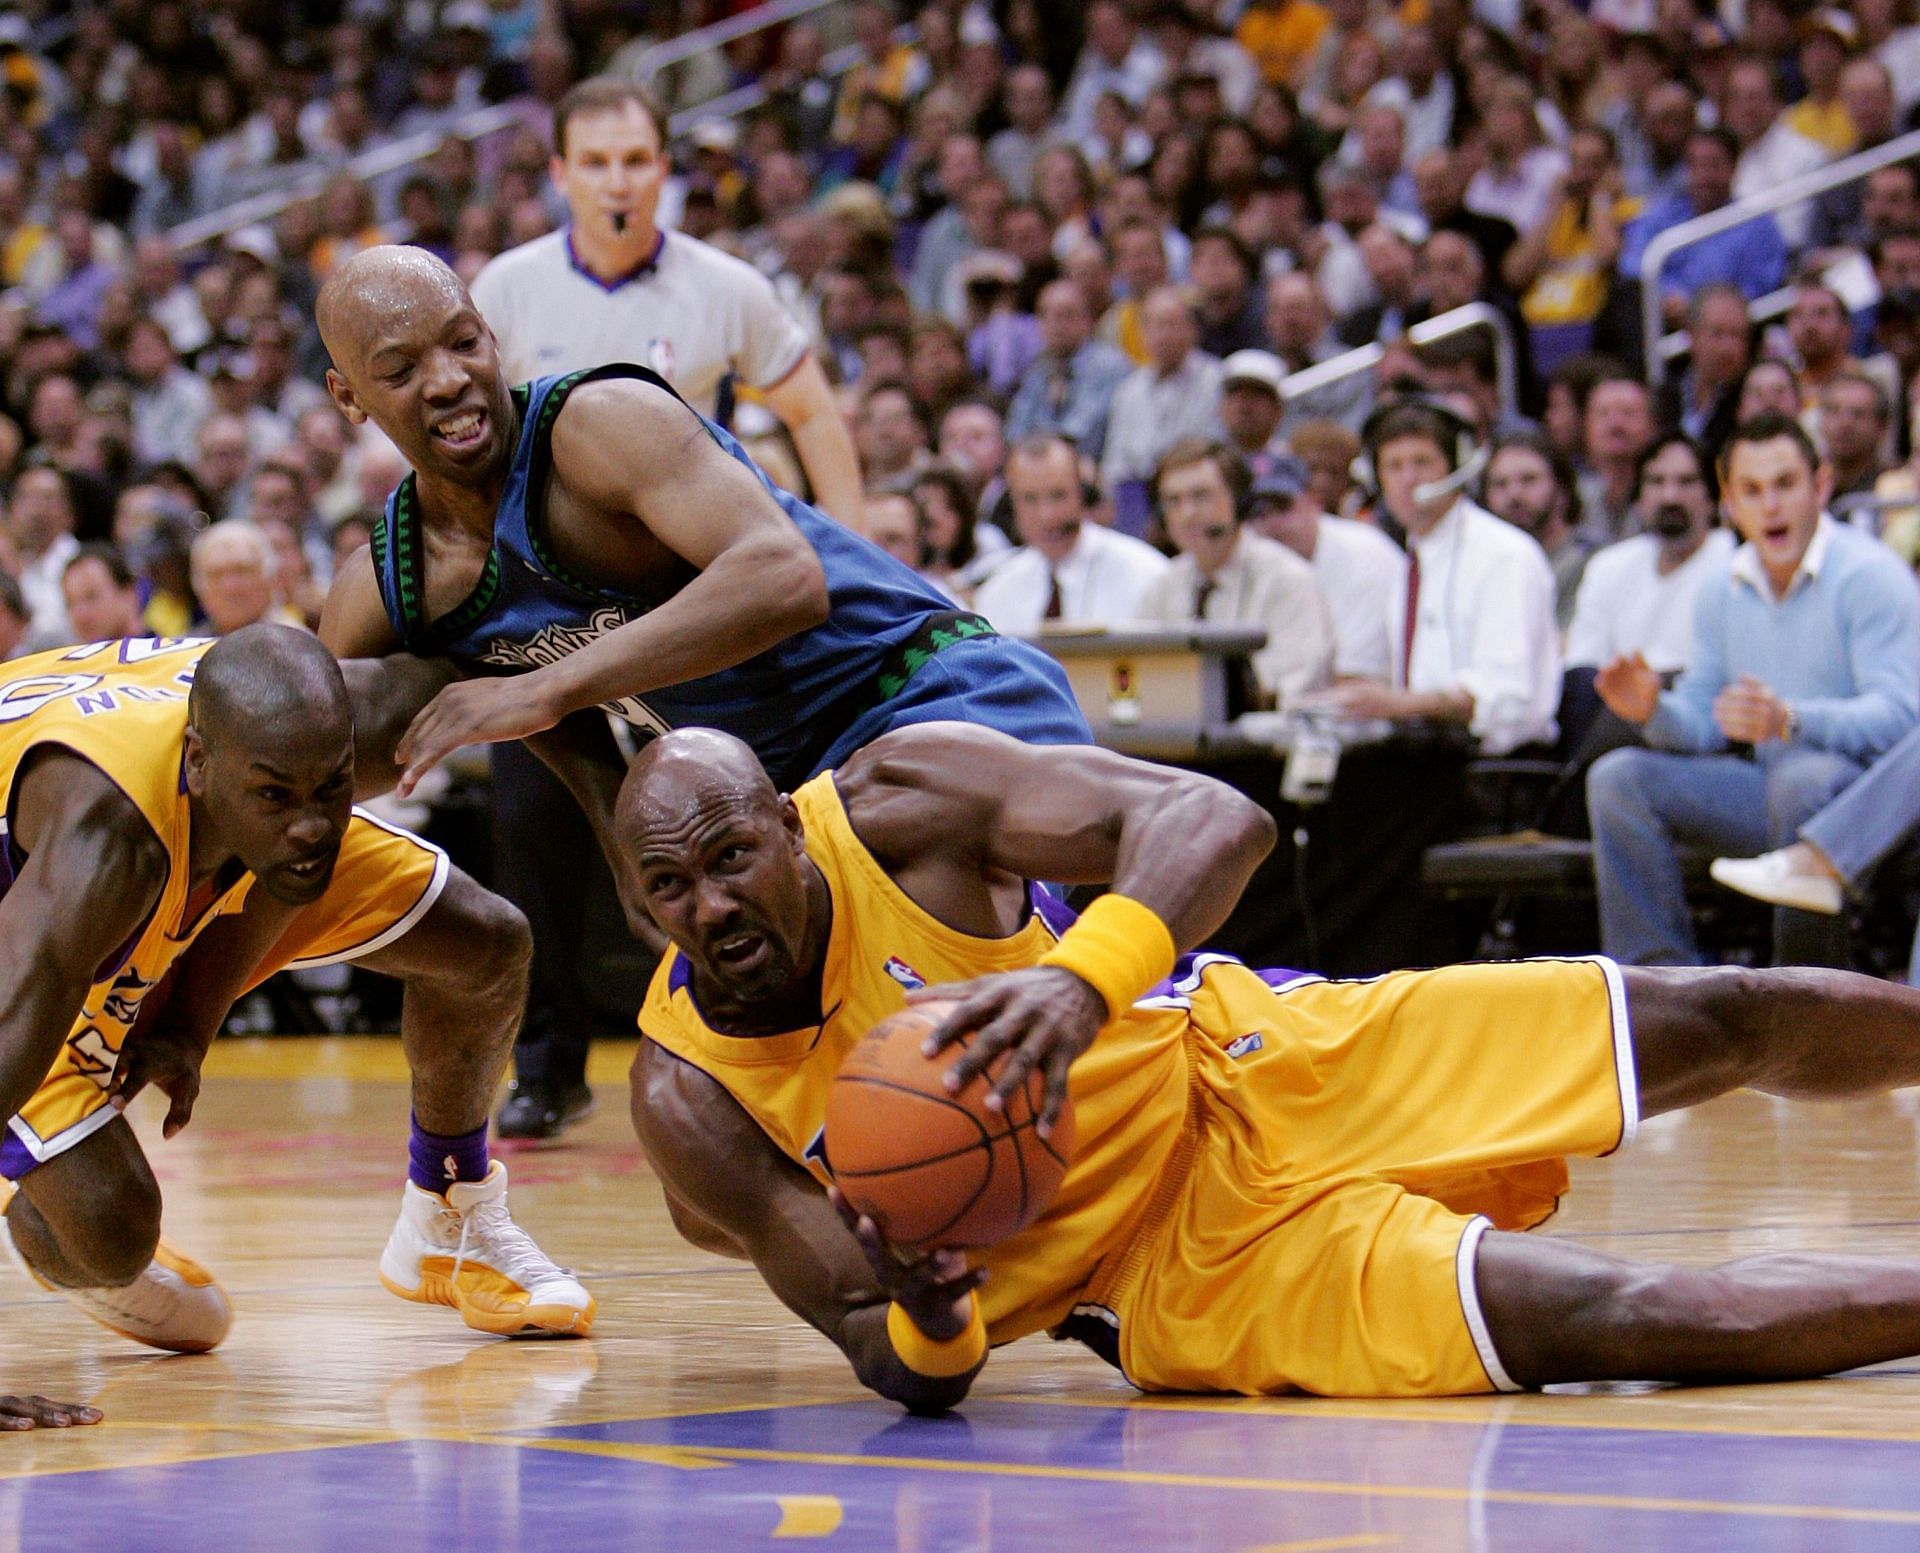 Karl Malone on the Lakers diving on the floor in his final NBA season